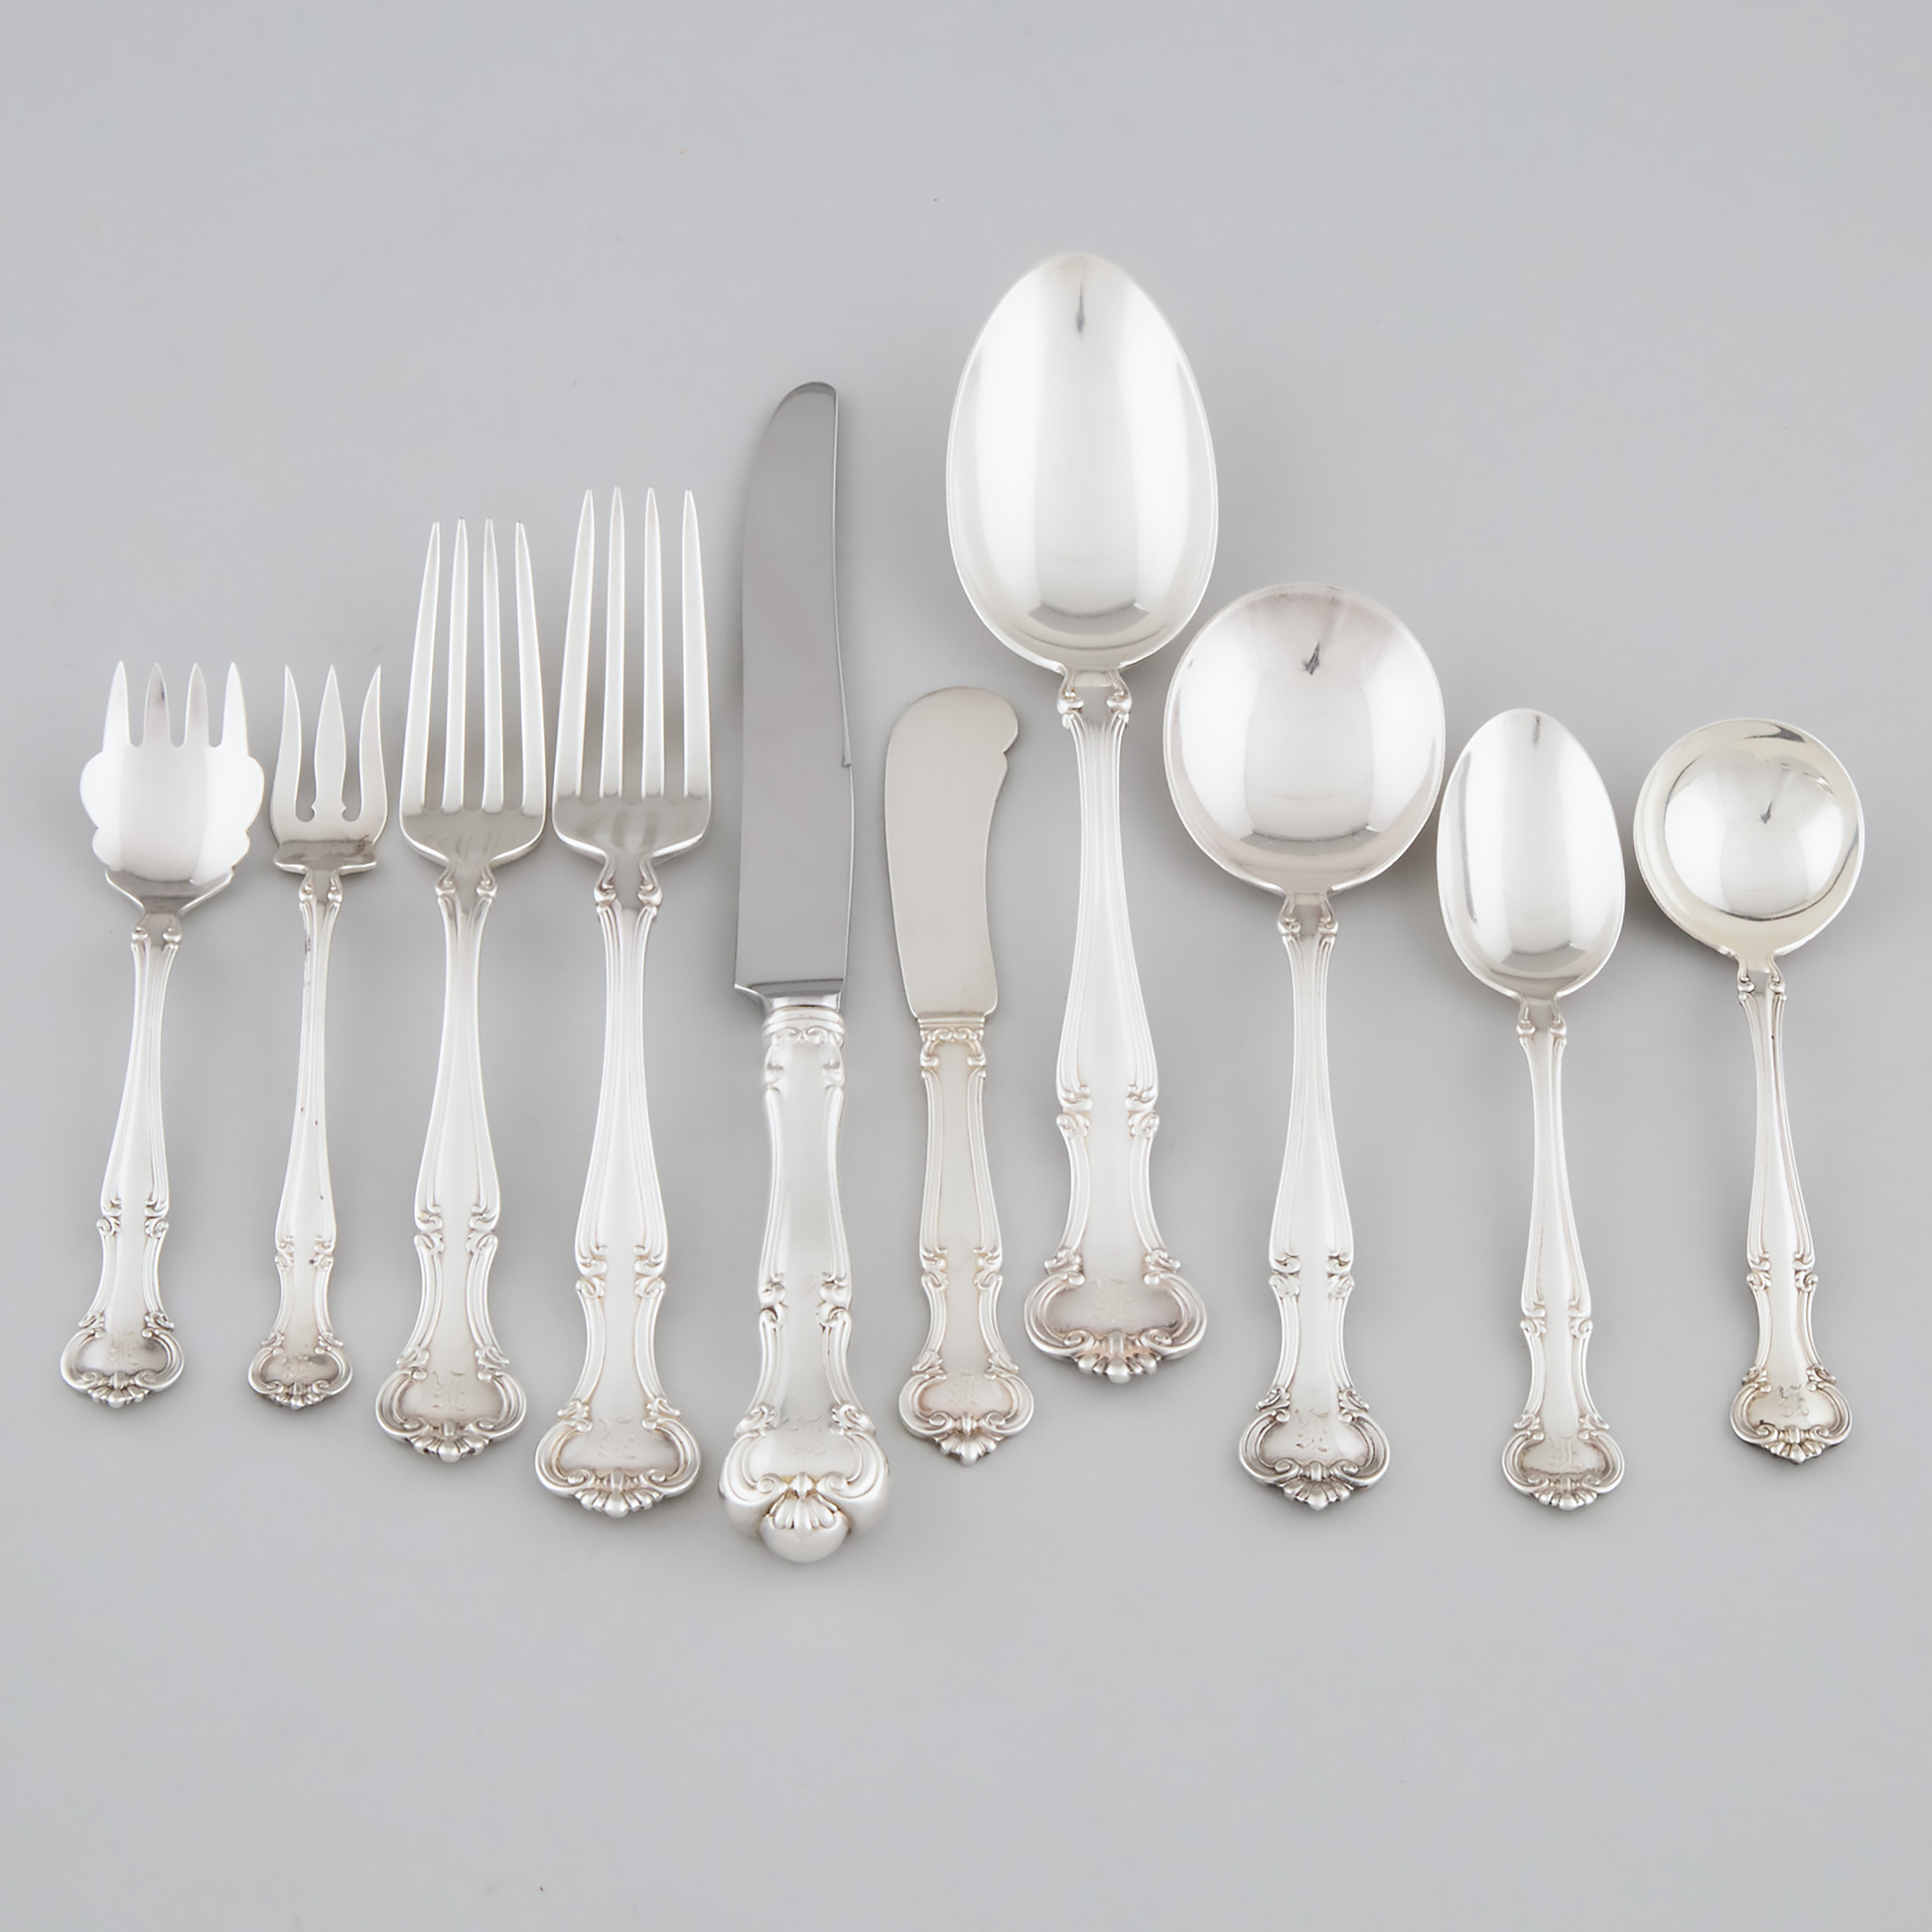 American Silver 'Cromwell' Pattern Flatware Service, Gorham Mfg. Co., Providence, R.I., for Shreve & Co., early 20th century